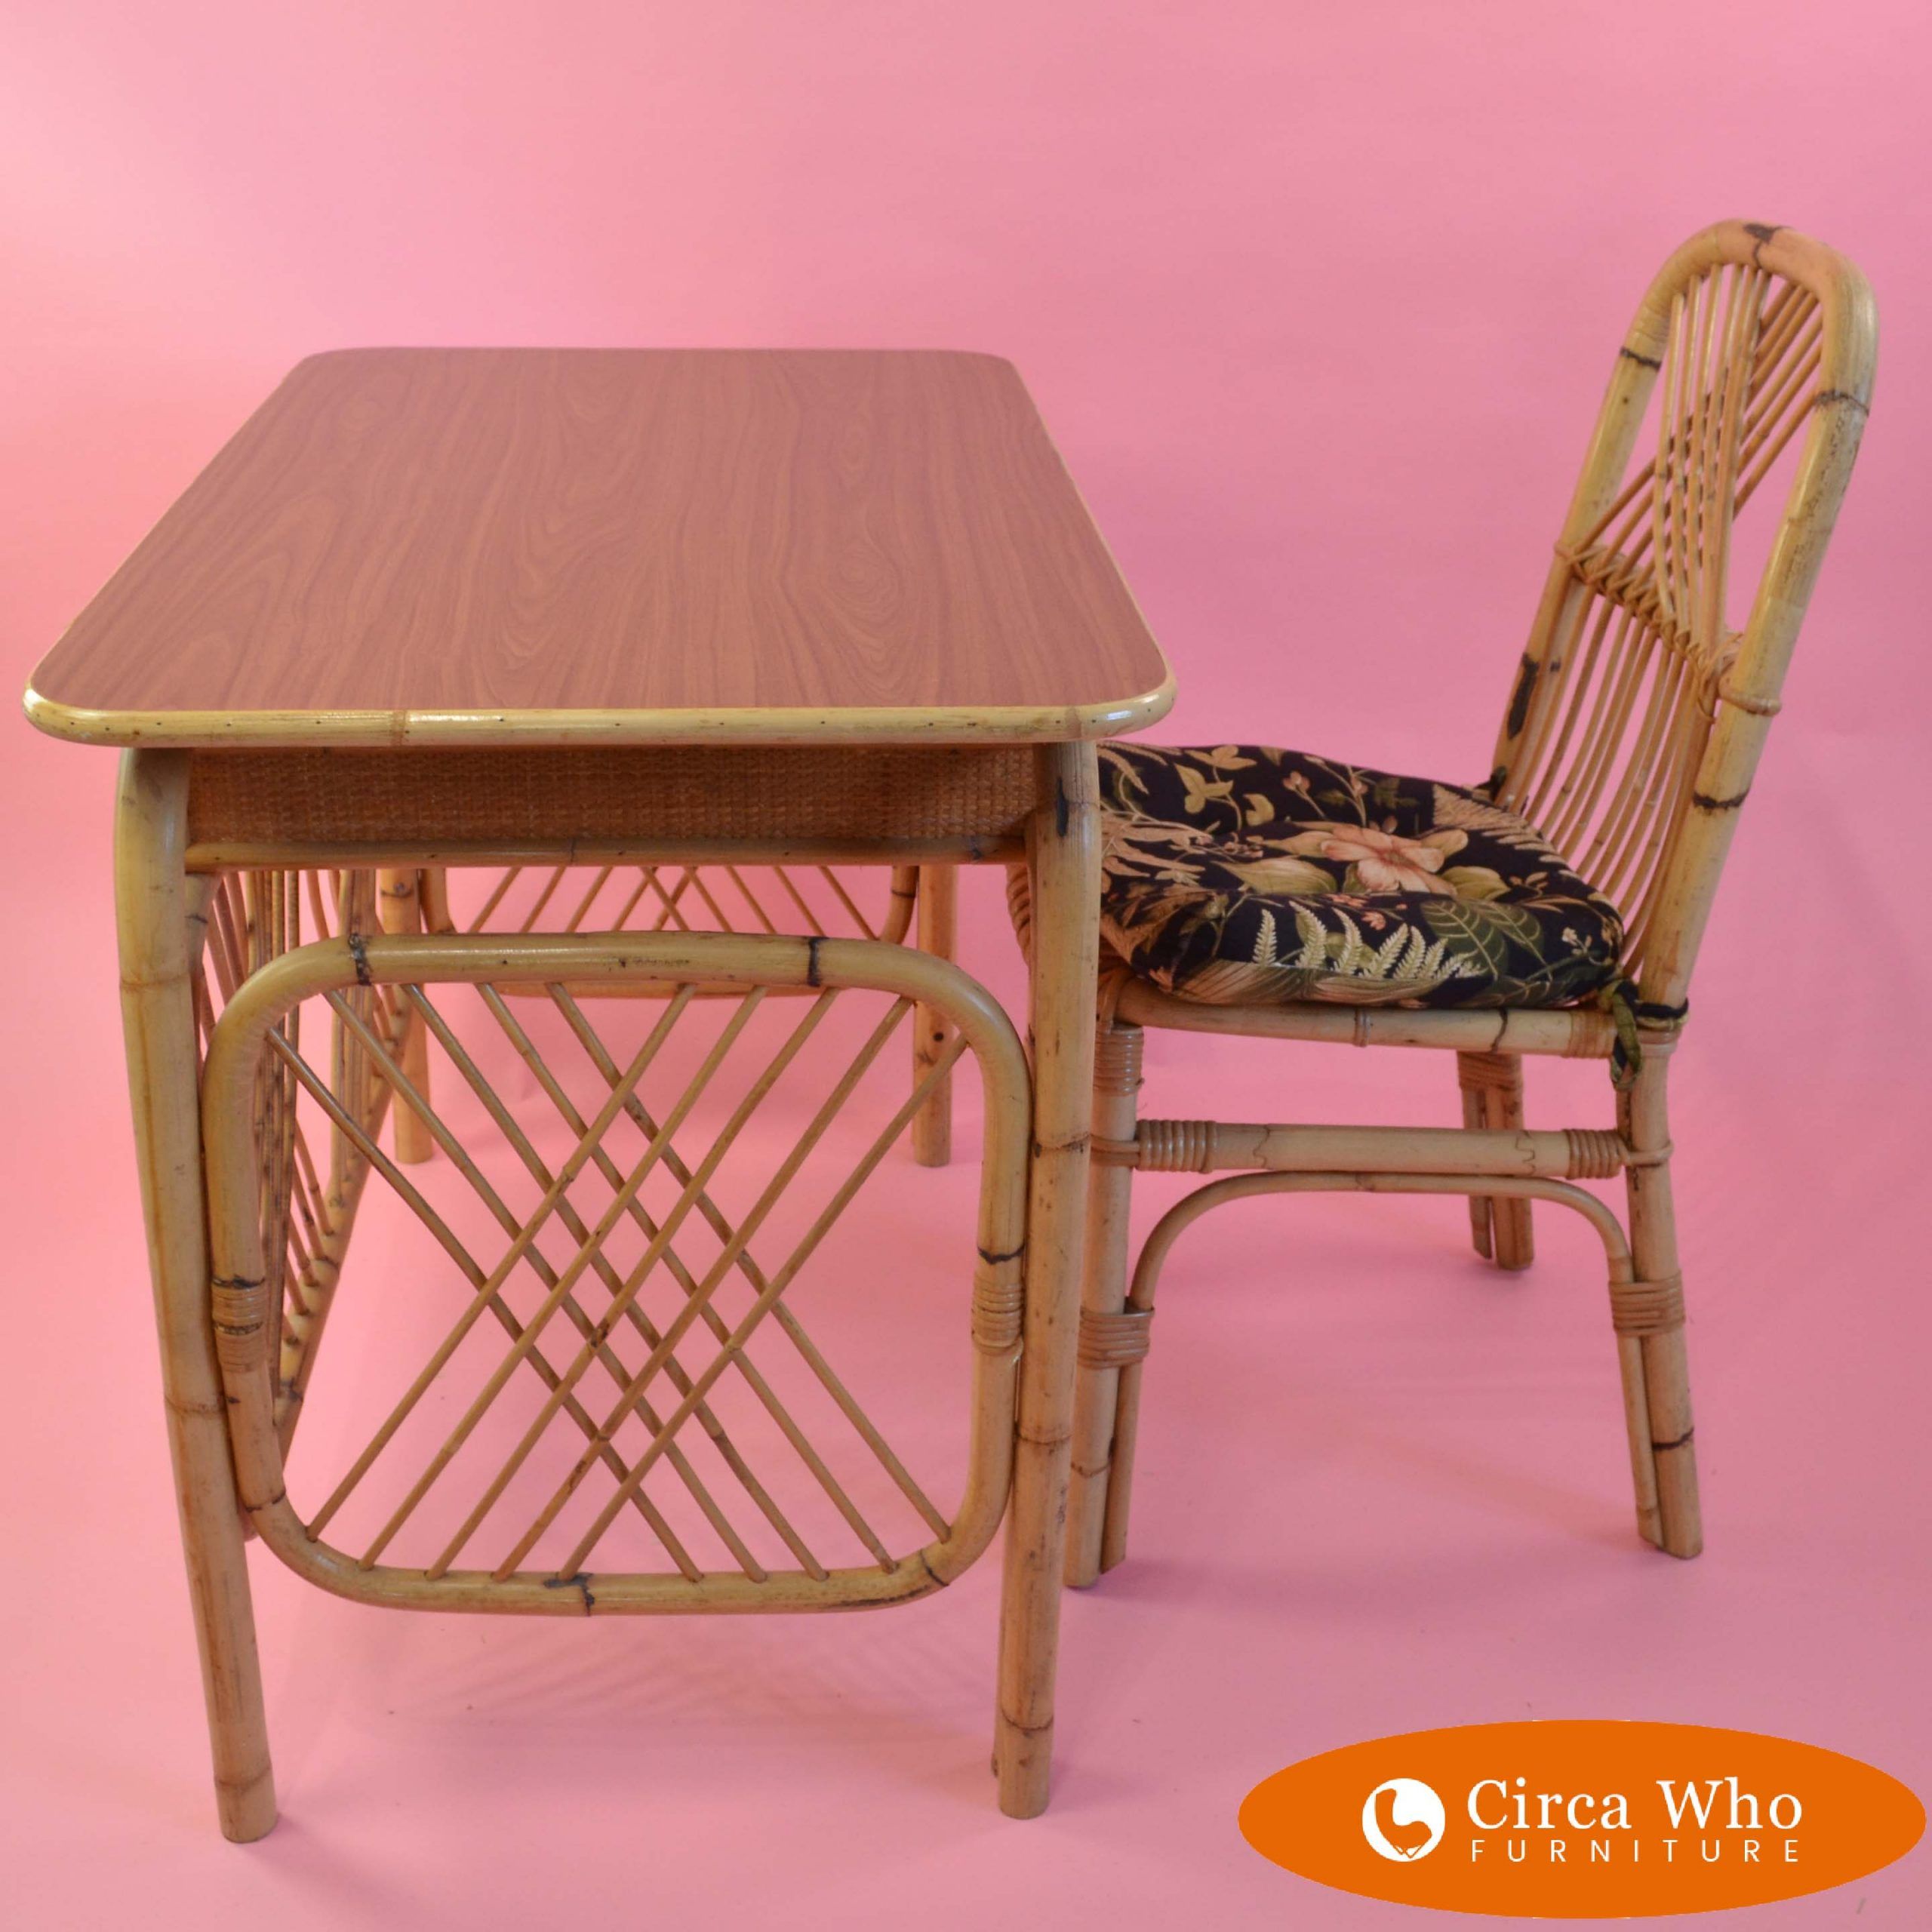 Rattan Desk With Chair | Circa Who With Bamboo And Vintage Cream Desks (View 15 of 15)